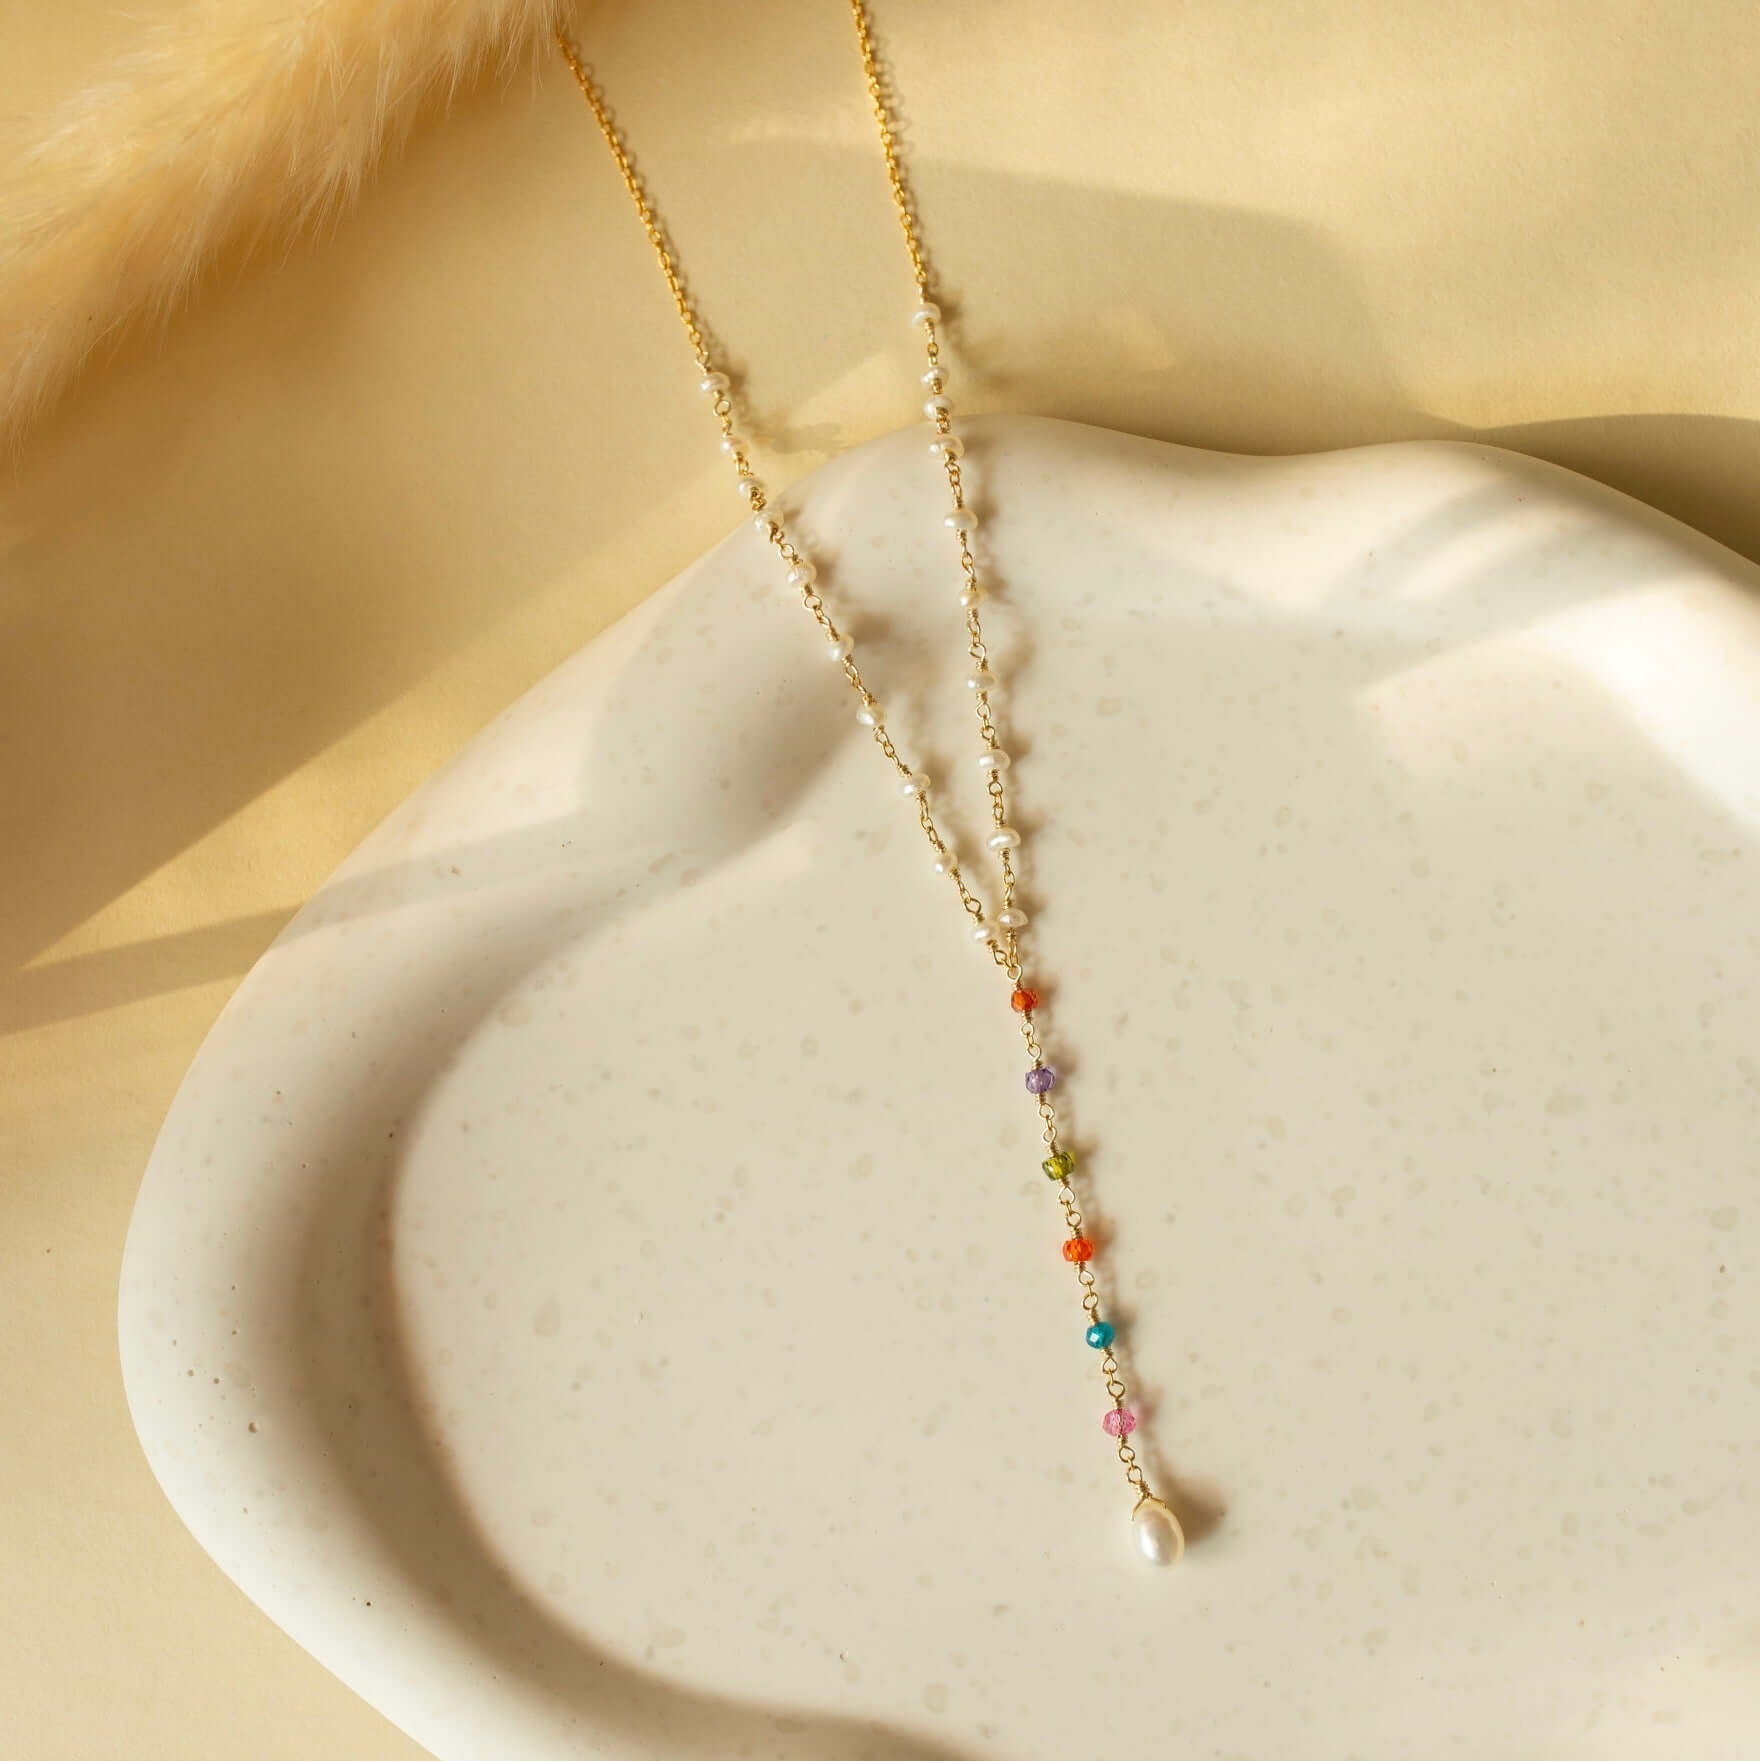 Stylish necklace with classic pearl pendant and colorful charms.